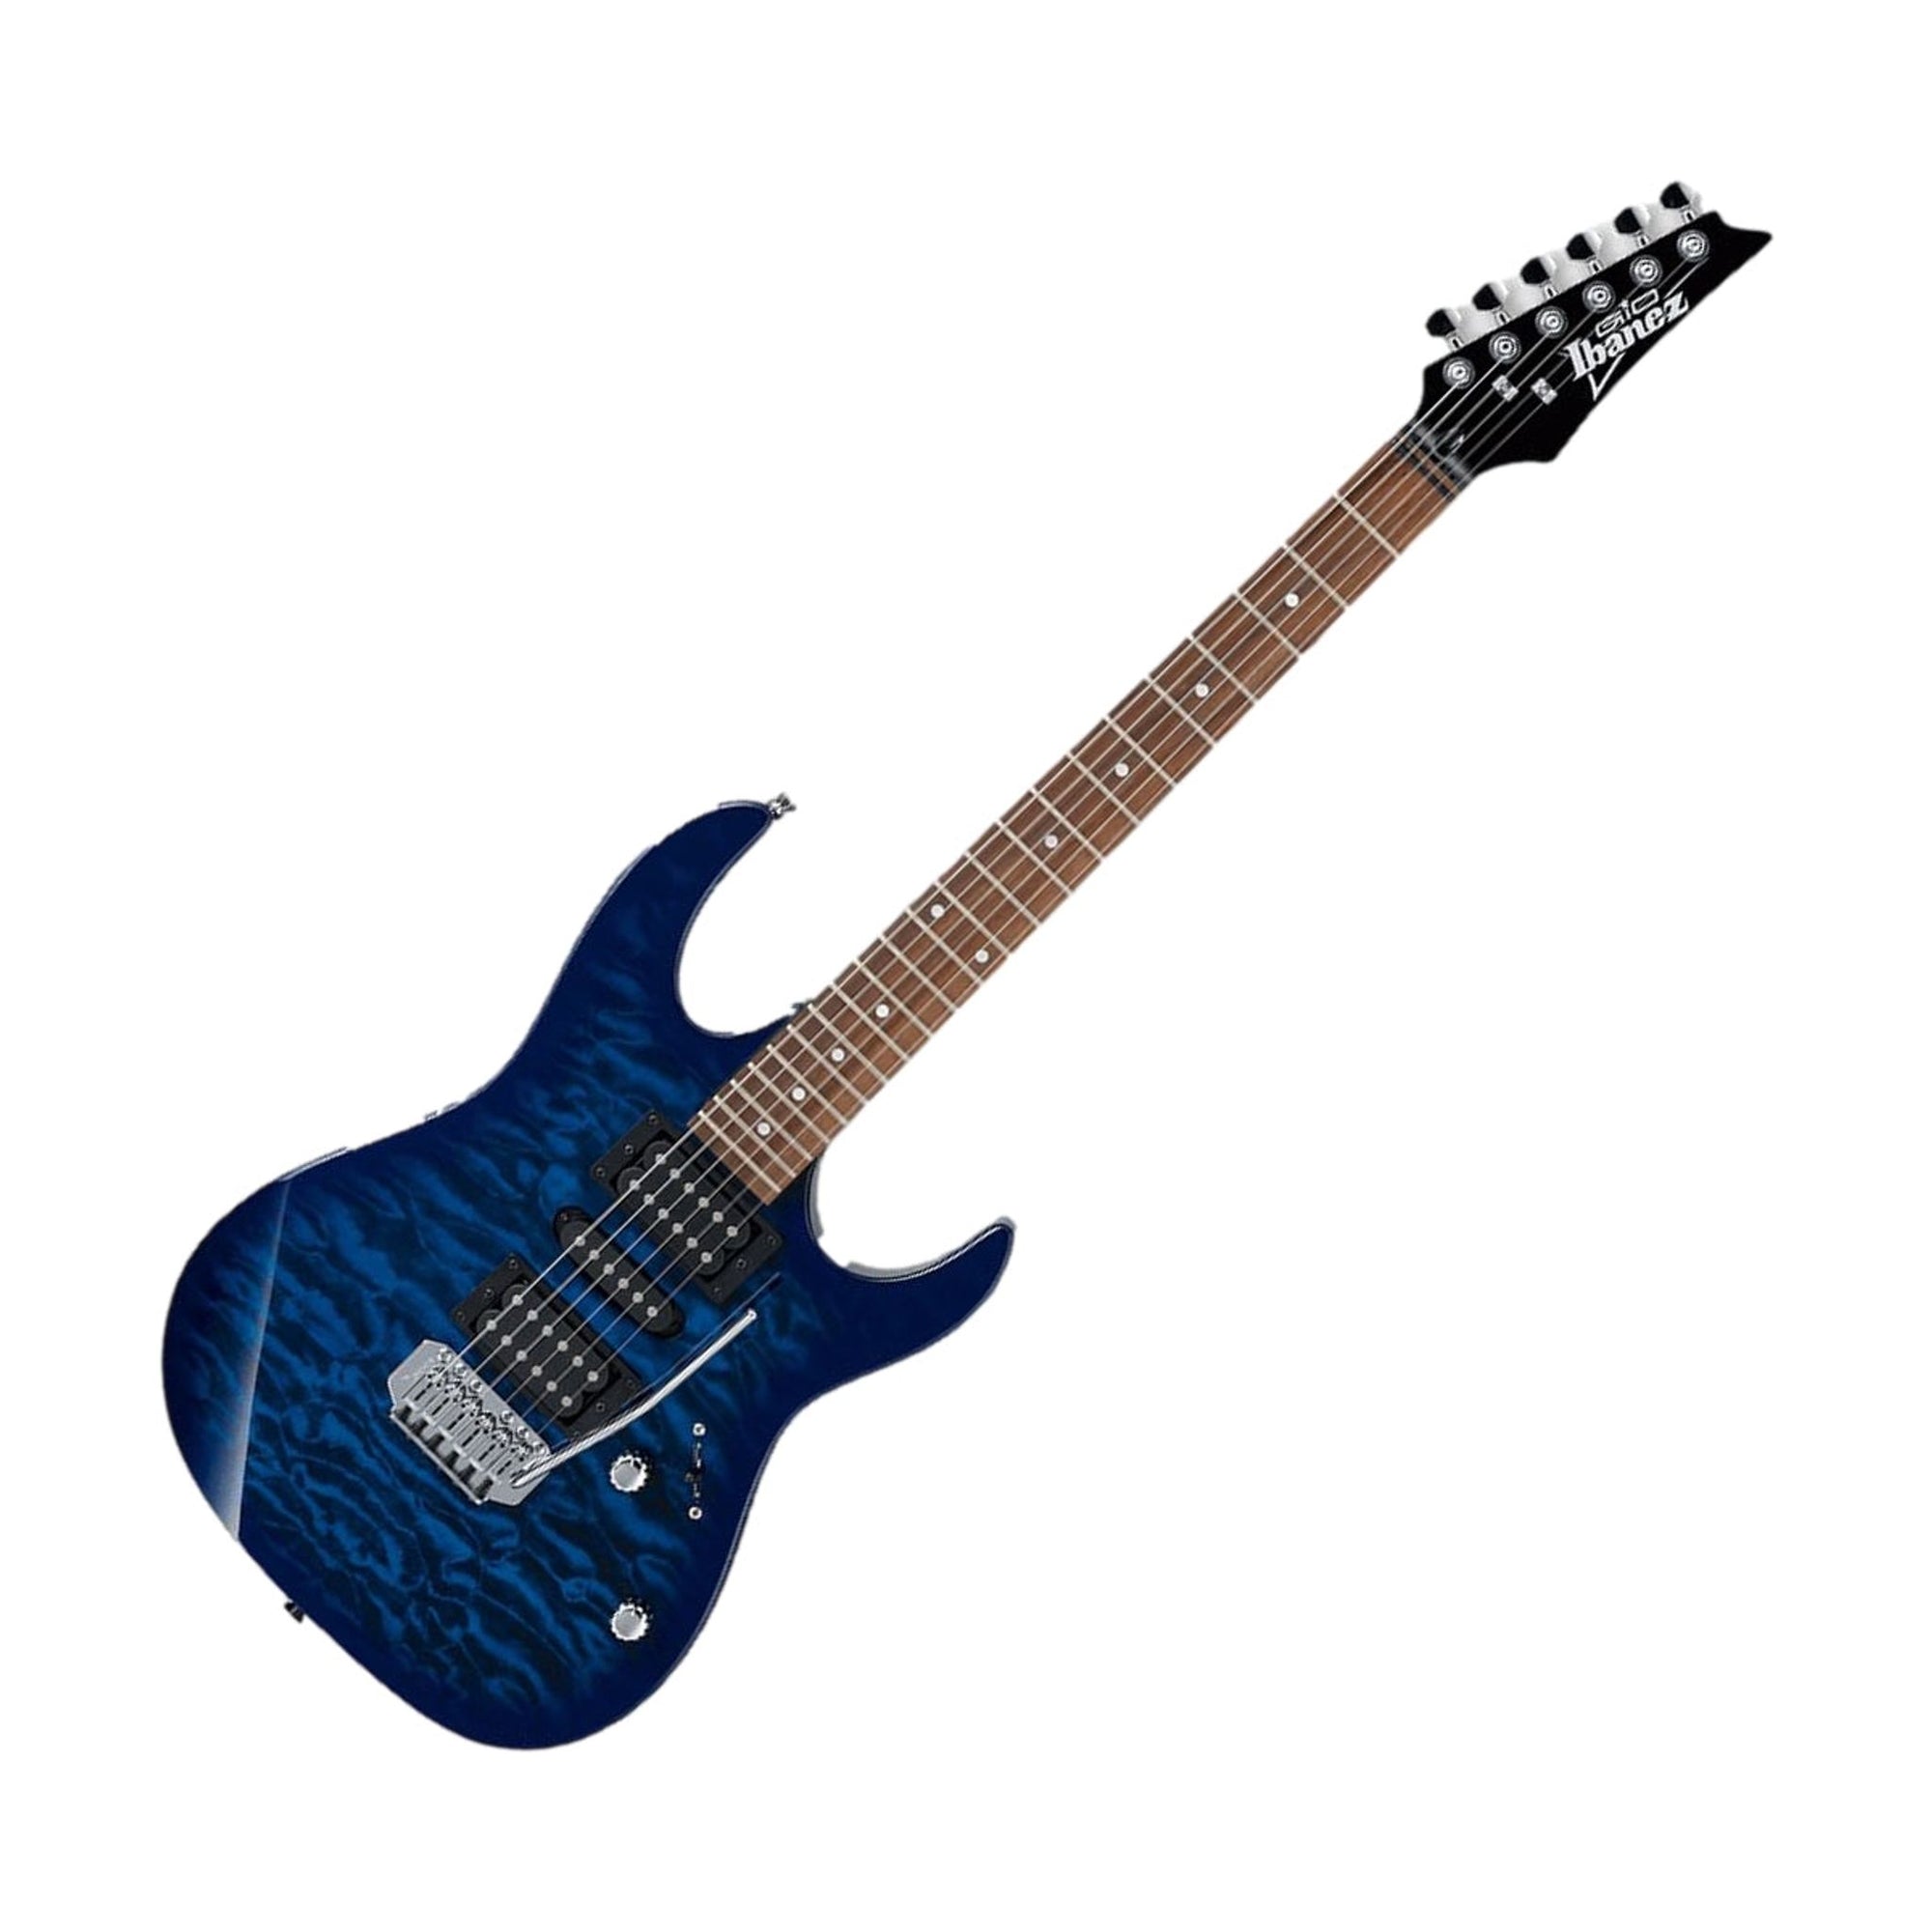 The Ibanez RX70QA Electric Guitar is a member of the GIO series which was developed for players who want Ibanez quality in a more affordable package.